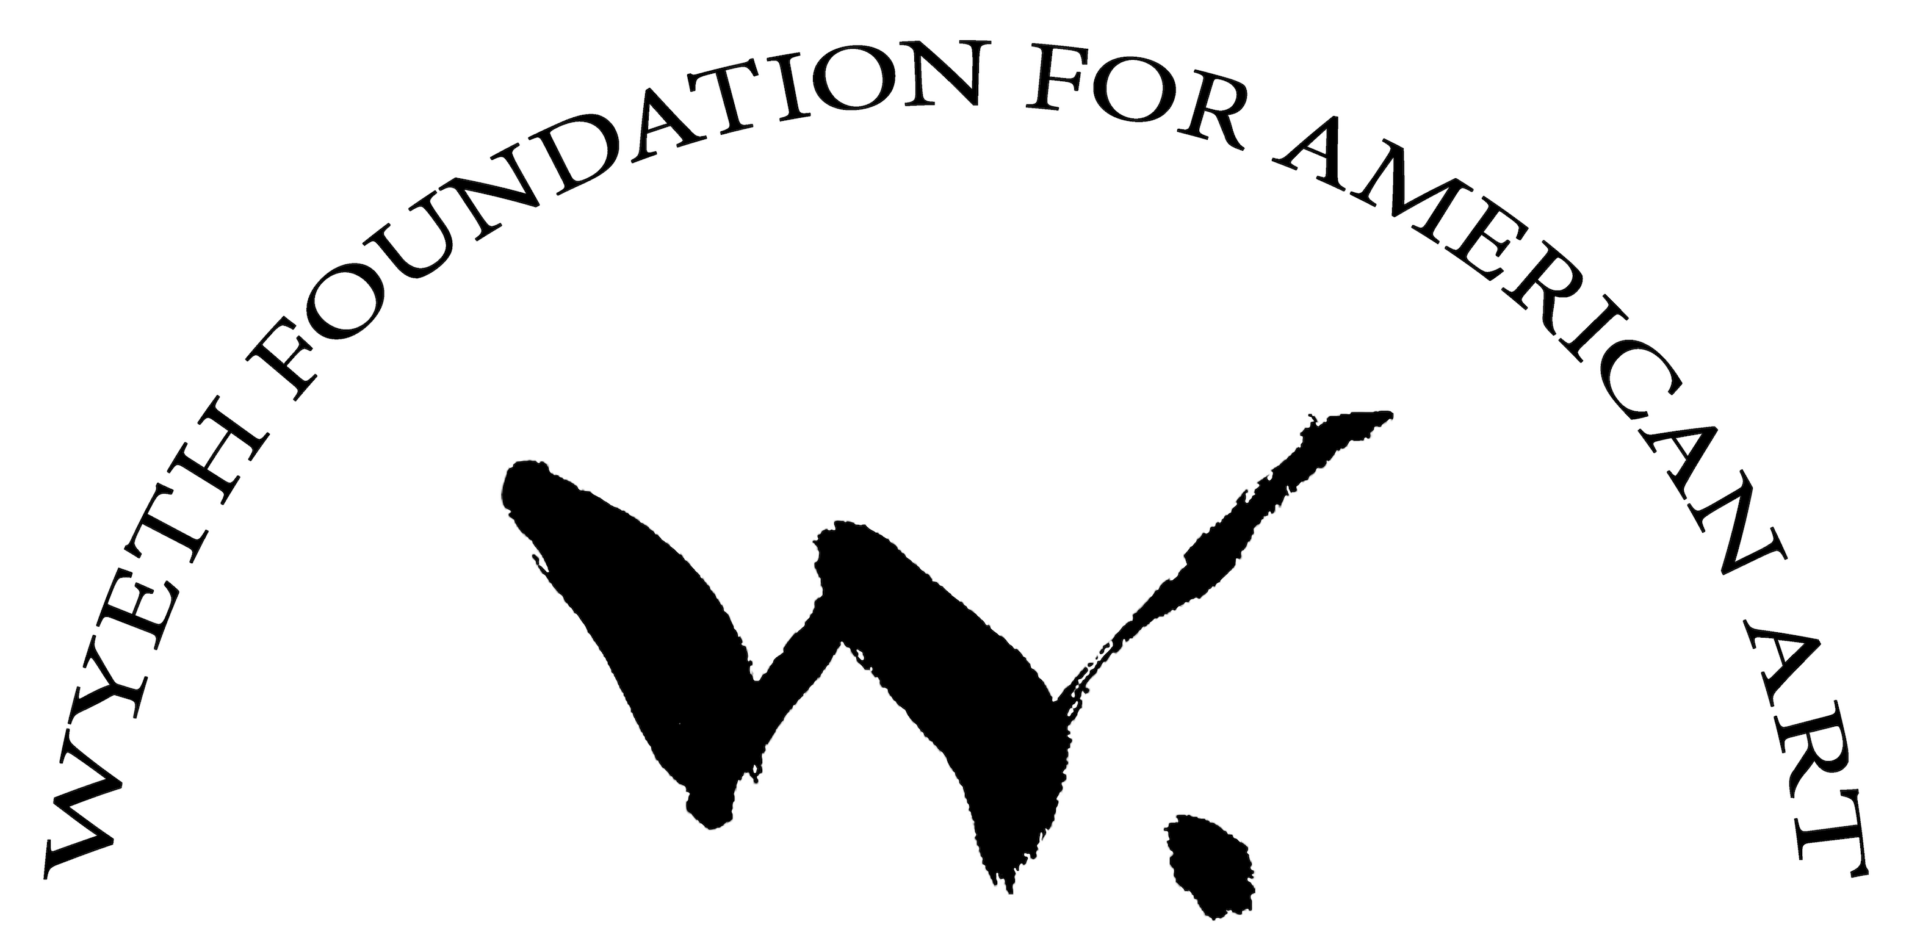 The logo for the wythe foundation for american art.